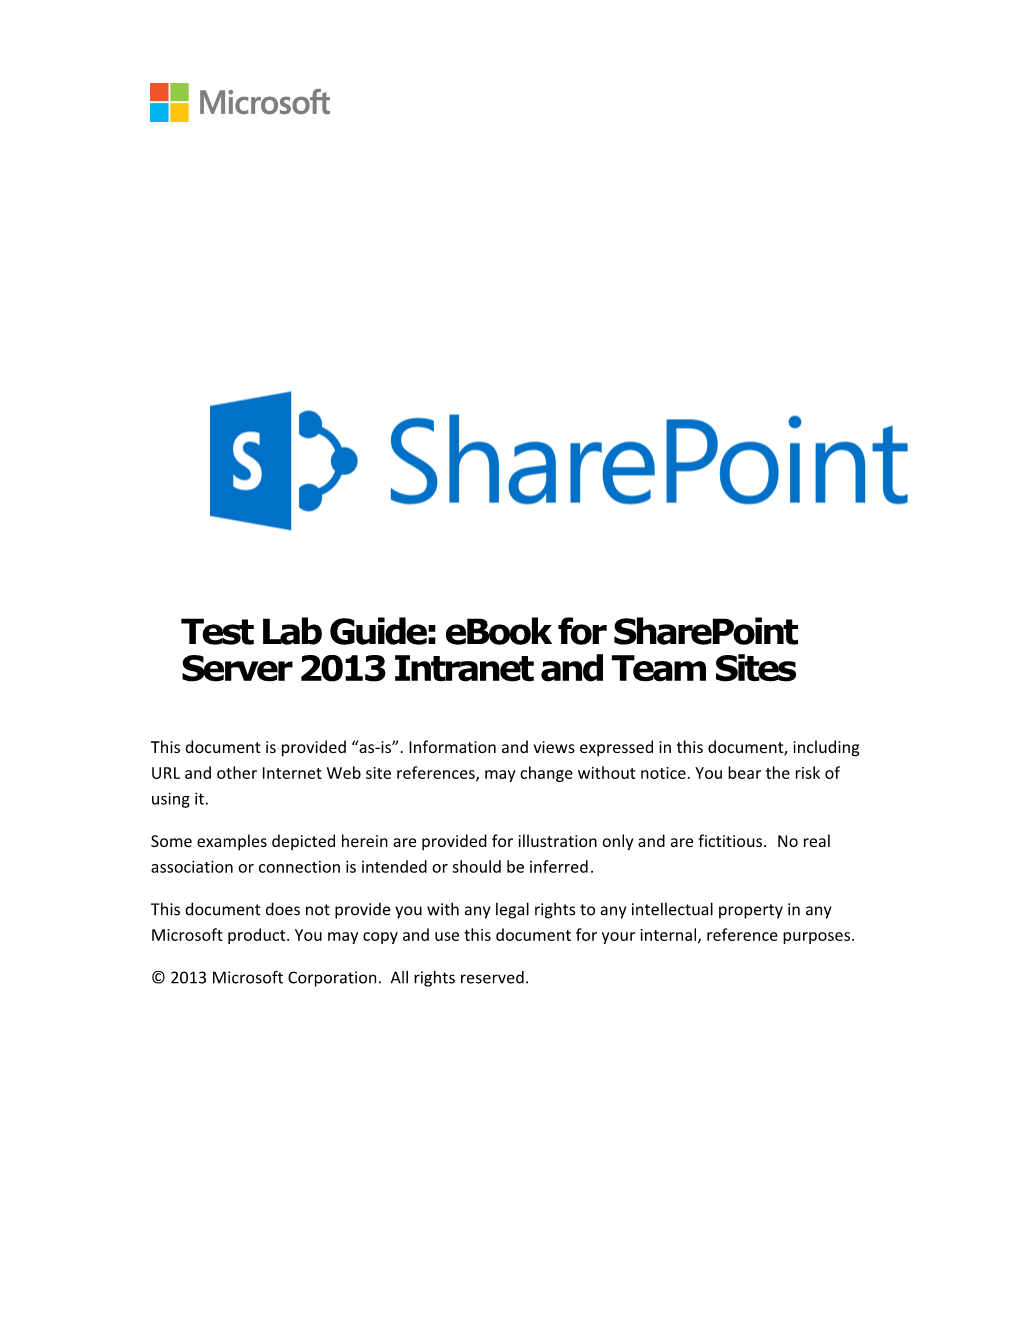 Test Lab Guide: Ebook for Sharepoint Server 2013 Intranet and Team Sites